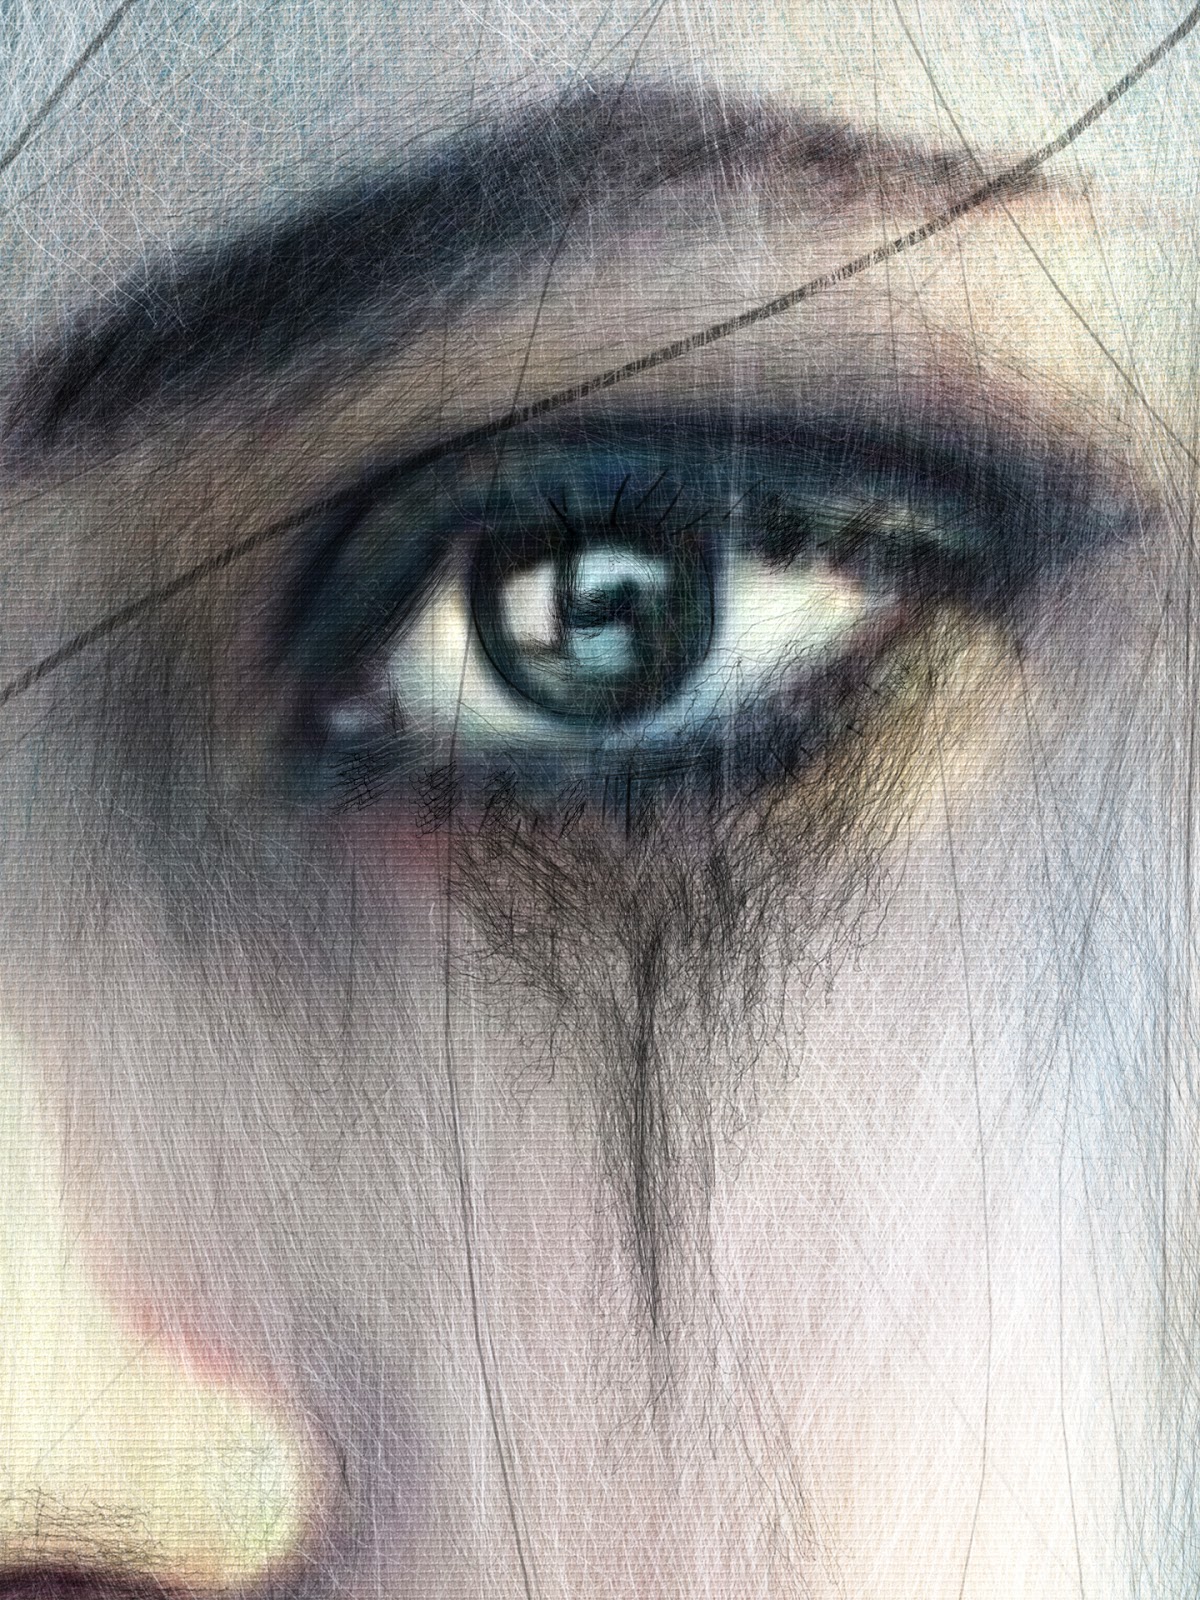 Eye painting with Corel Painter